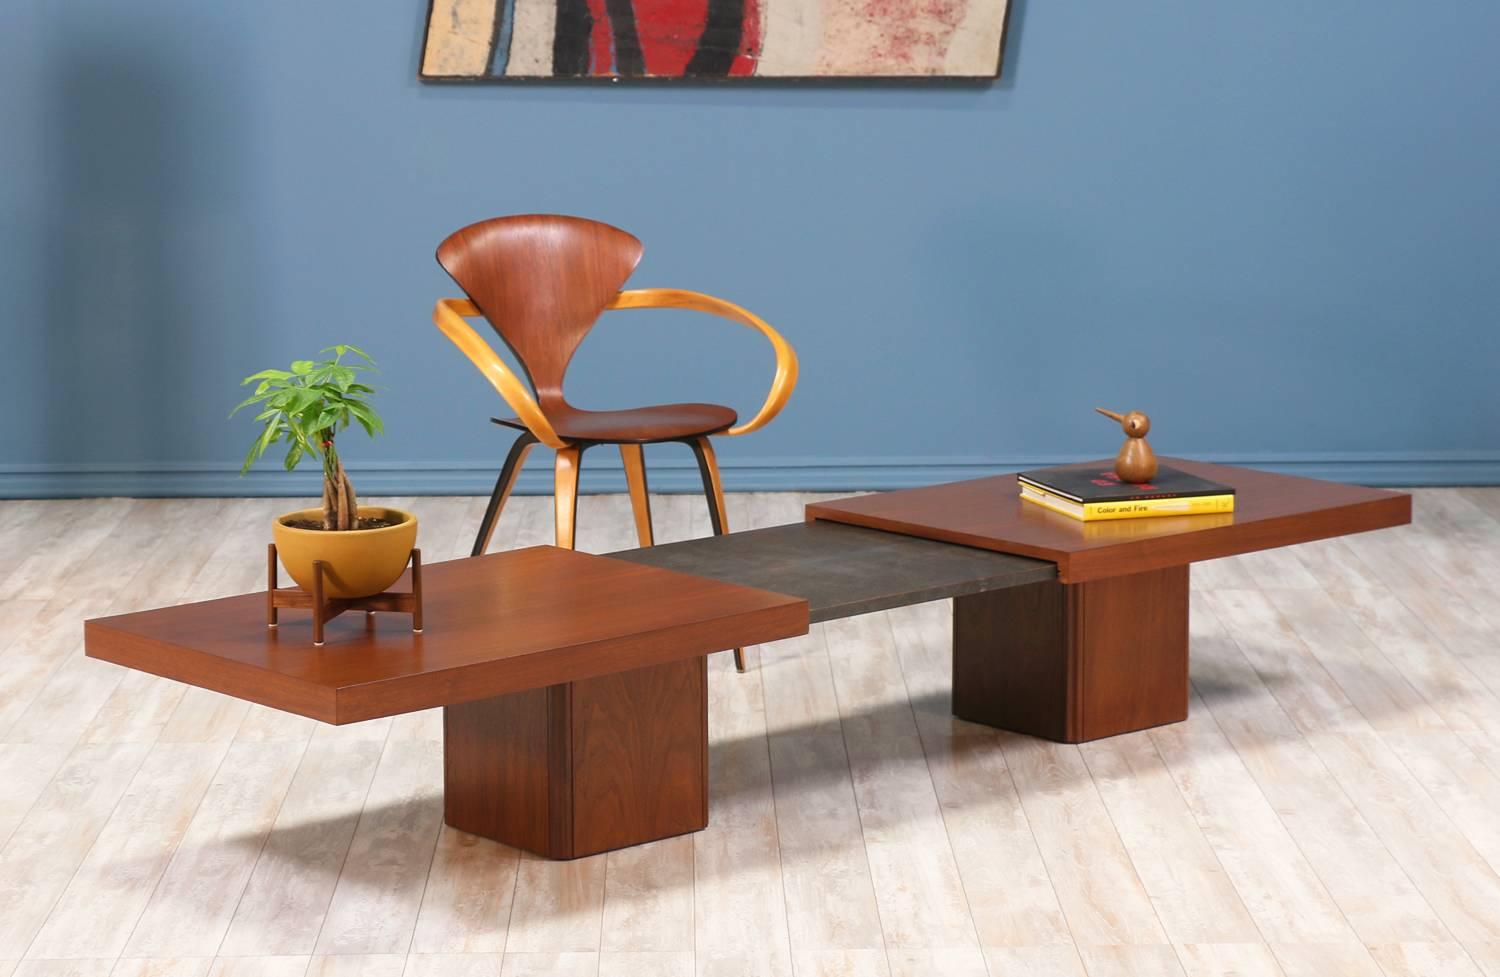 Mid Century modern expanding coffee table designed by John Keal for Brown Saltman in the United States circa 1960’s. This walnut wood coffee table extends up to 96” revealing a dark grey laminate surface in the center. The expandable top sits upon